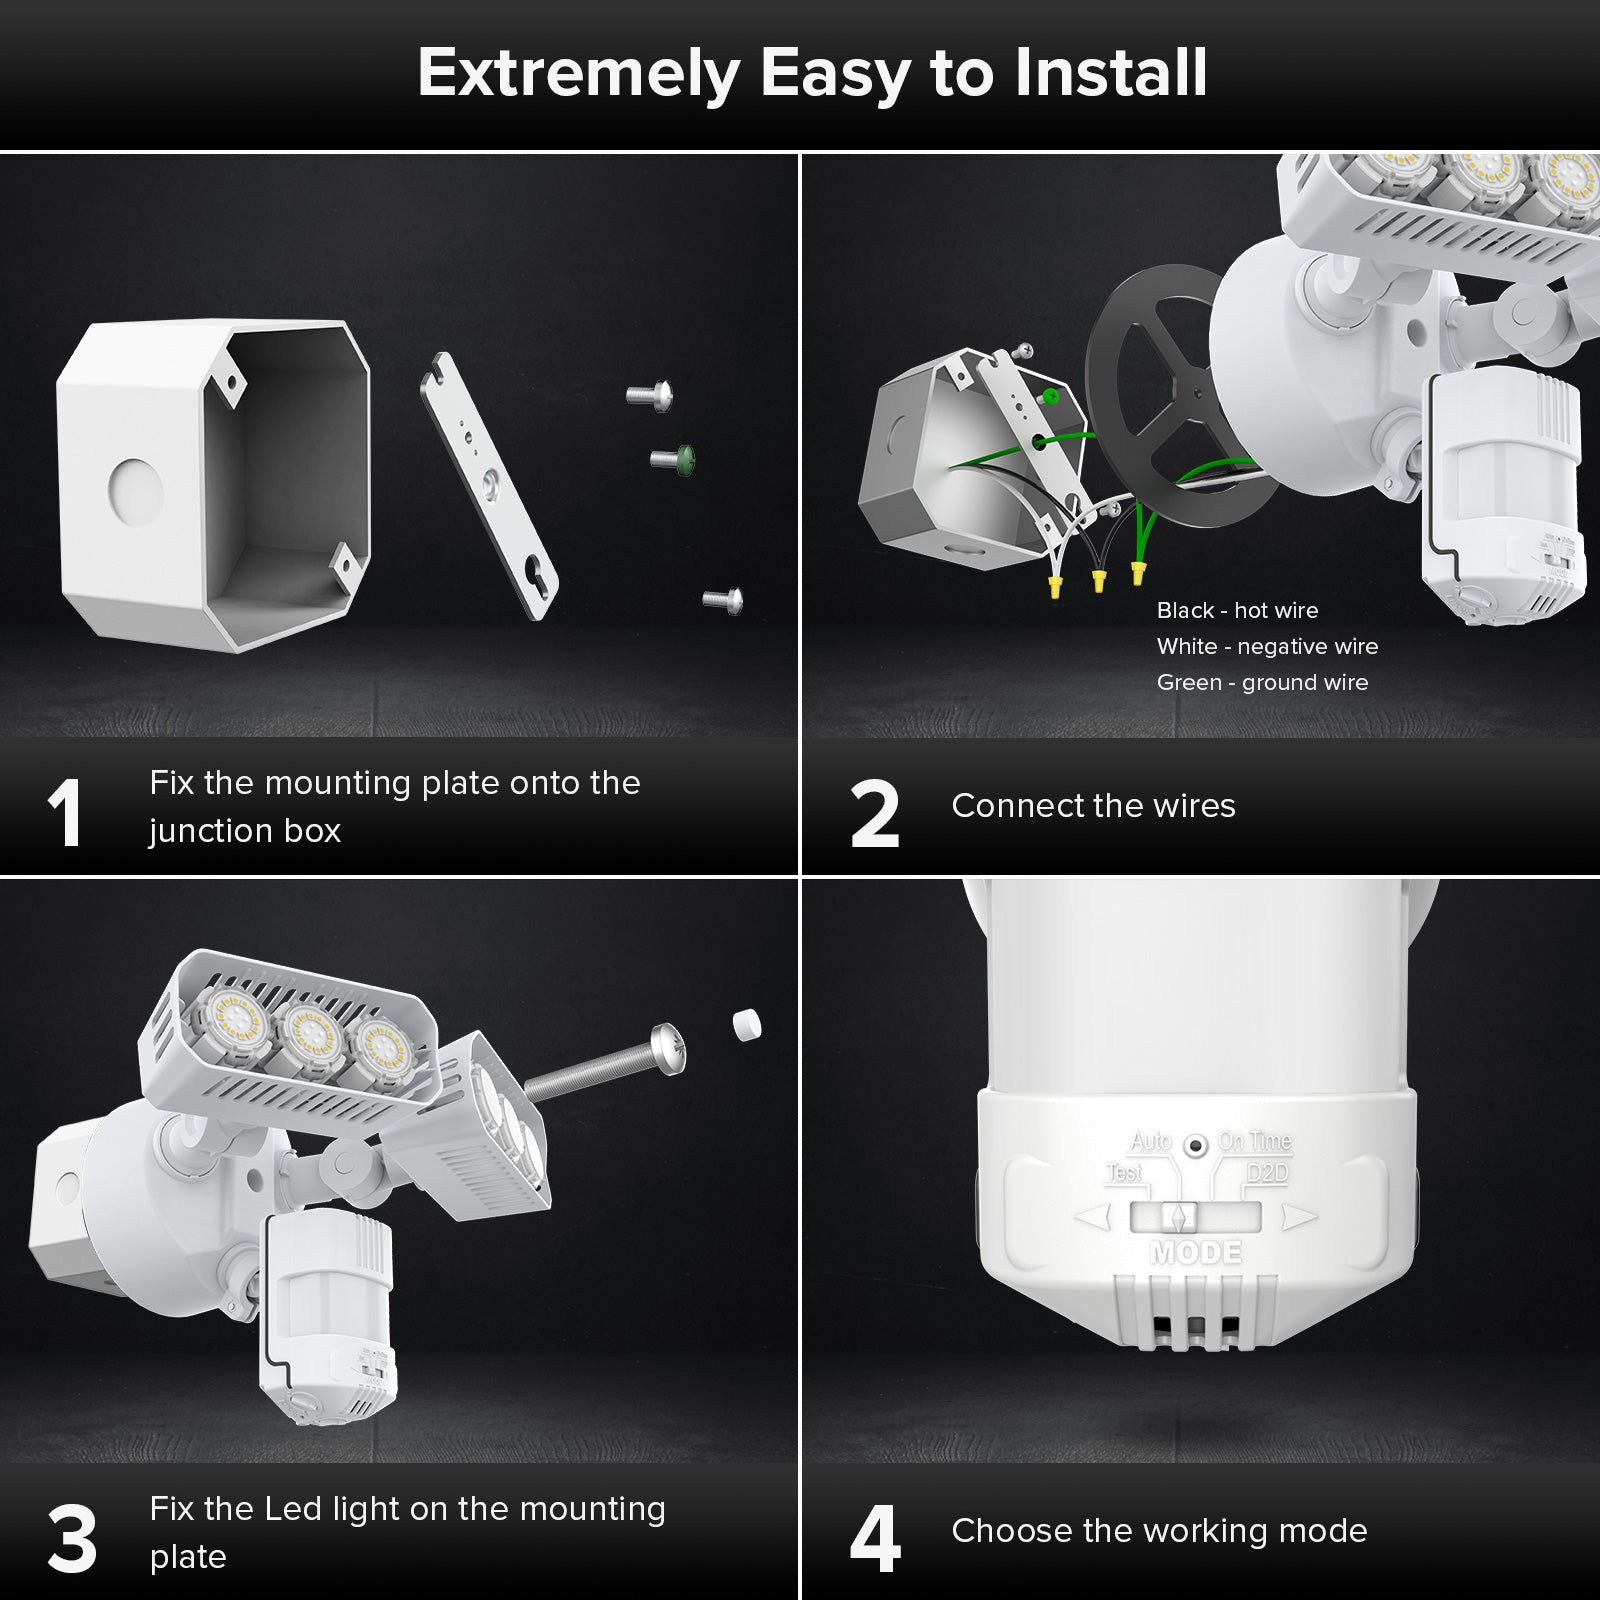 38W LED Security Light (Dusk to Dawn & Motion Sensor) is extremely easy to install